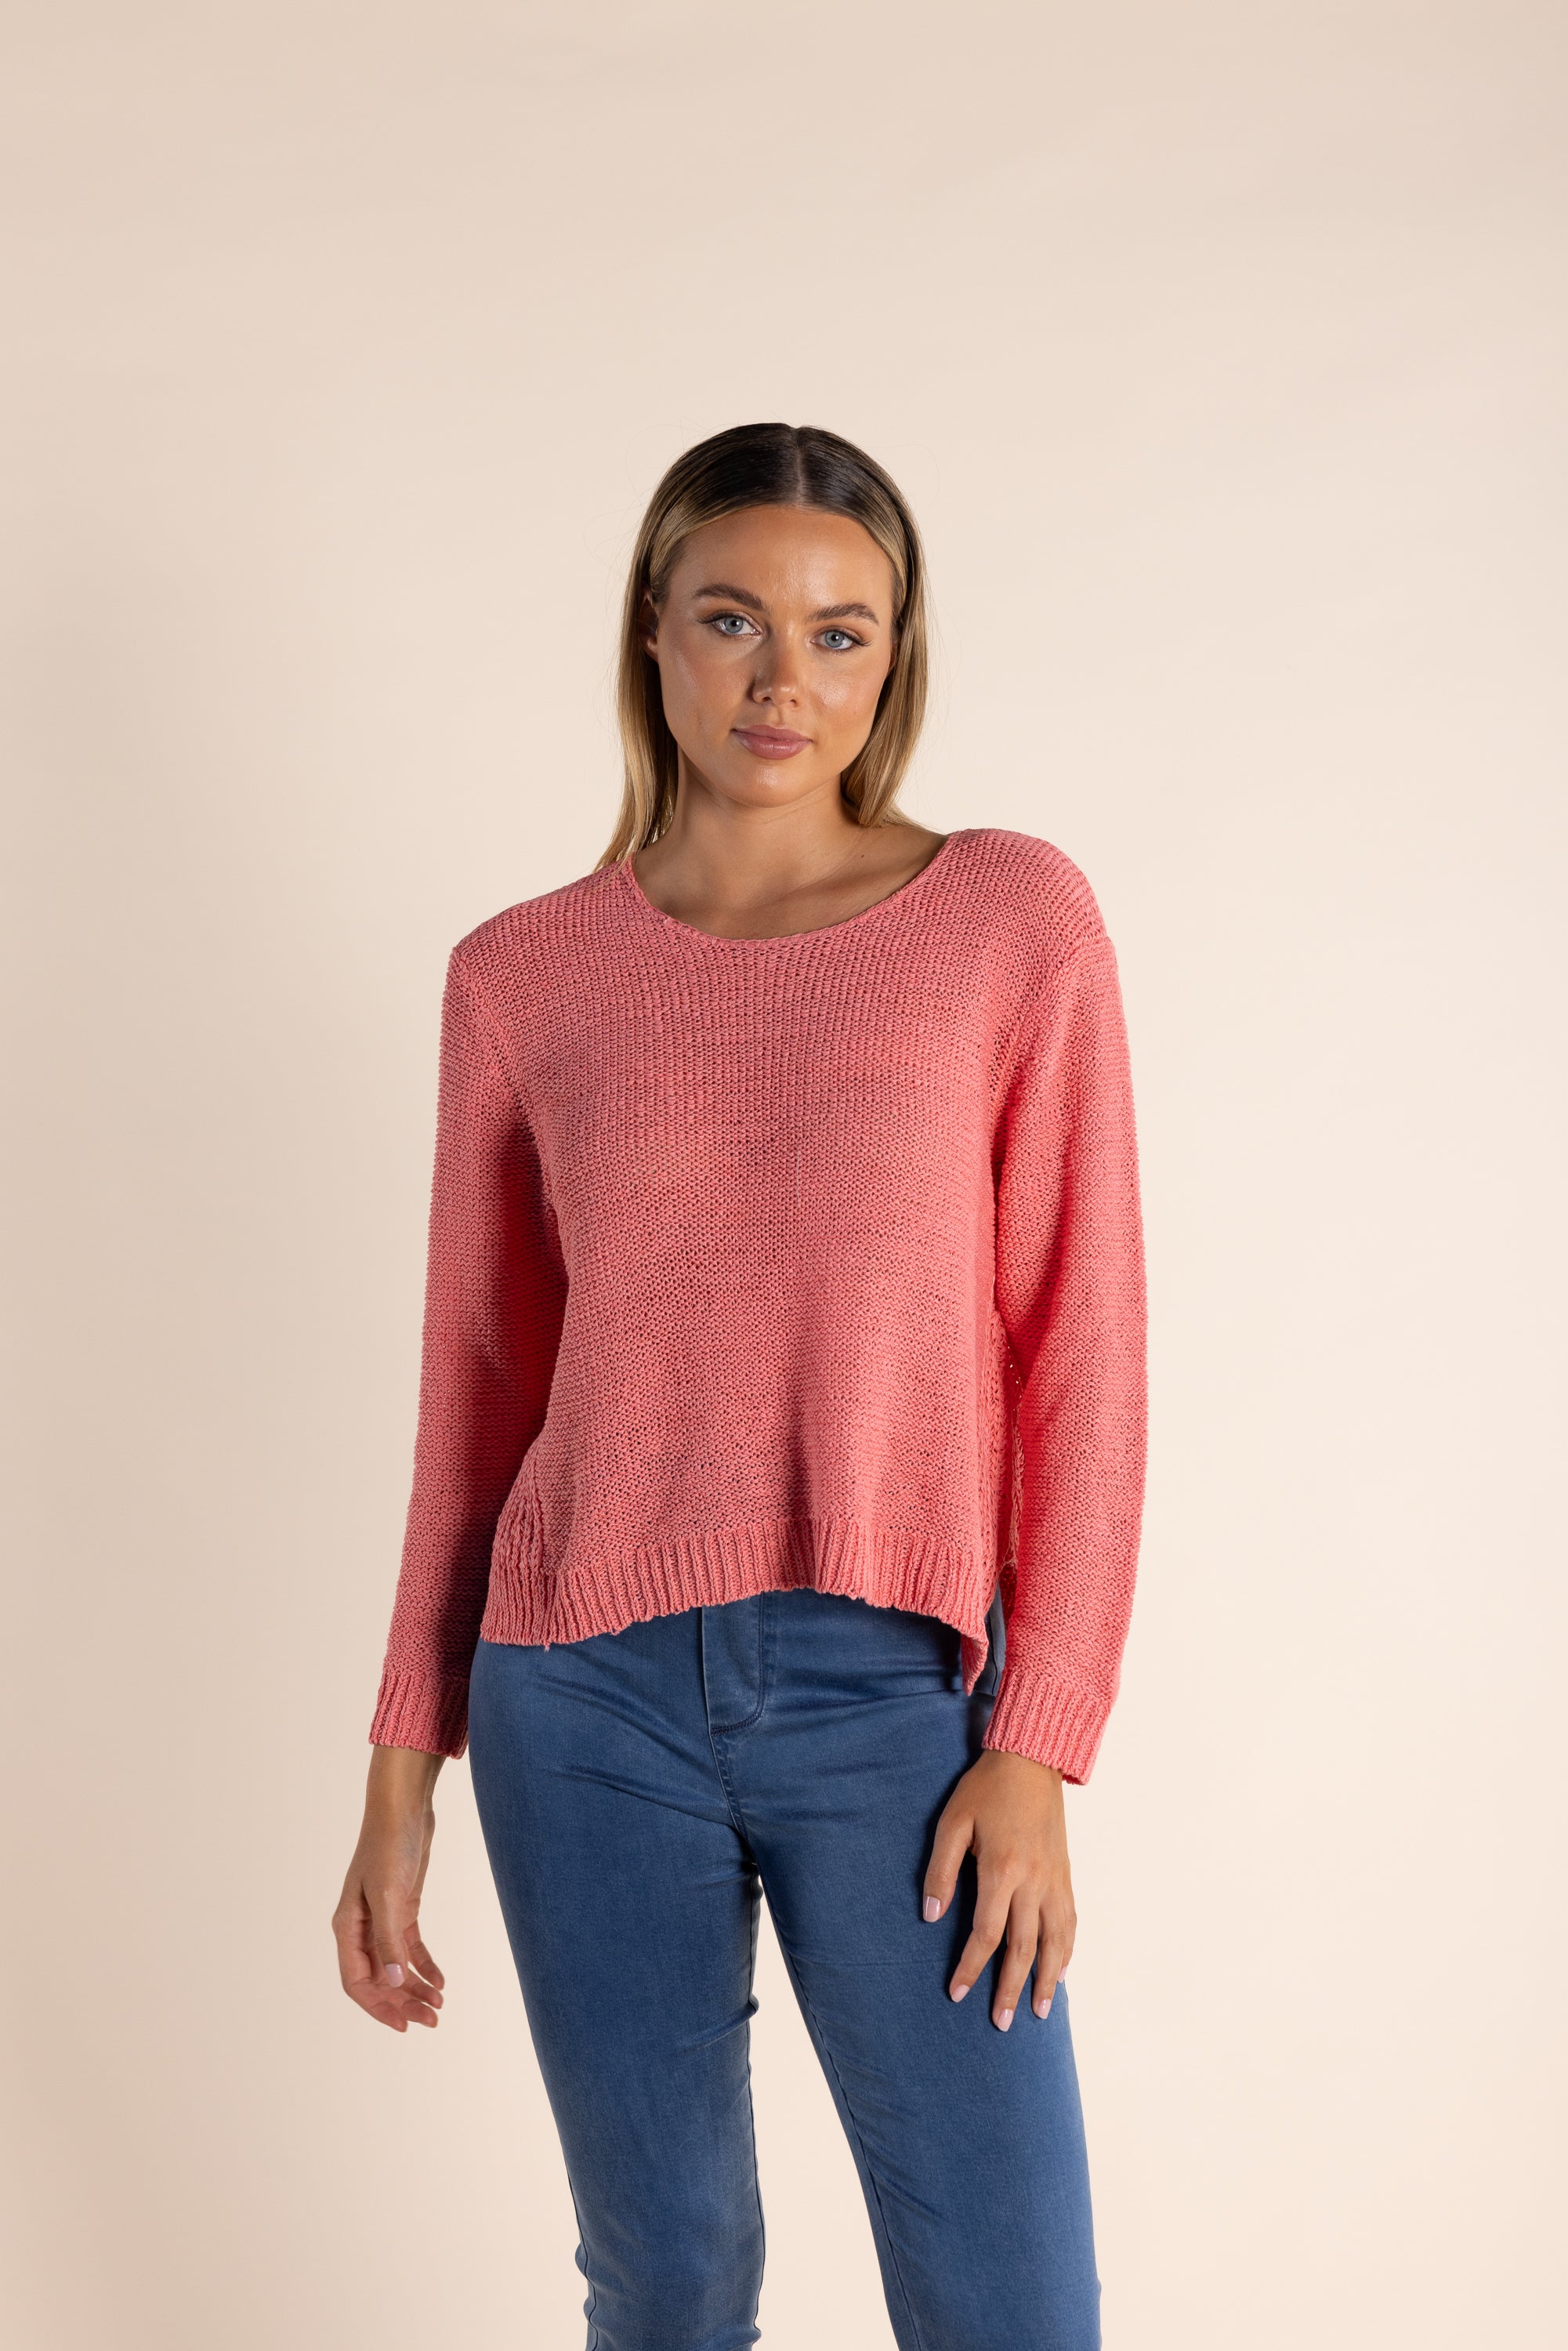 Two T's - Tape Yarn 7/8 Sleeve Knit Coral